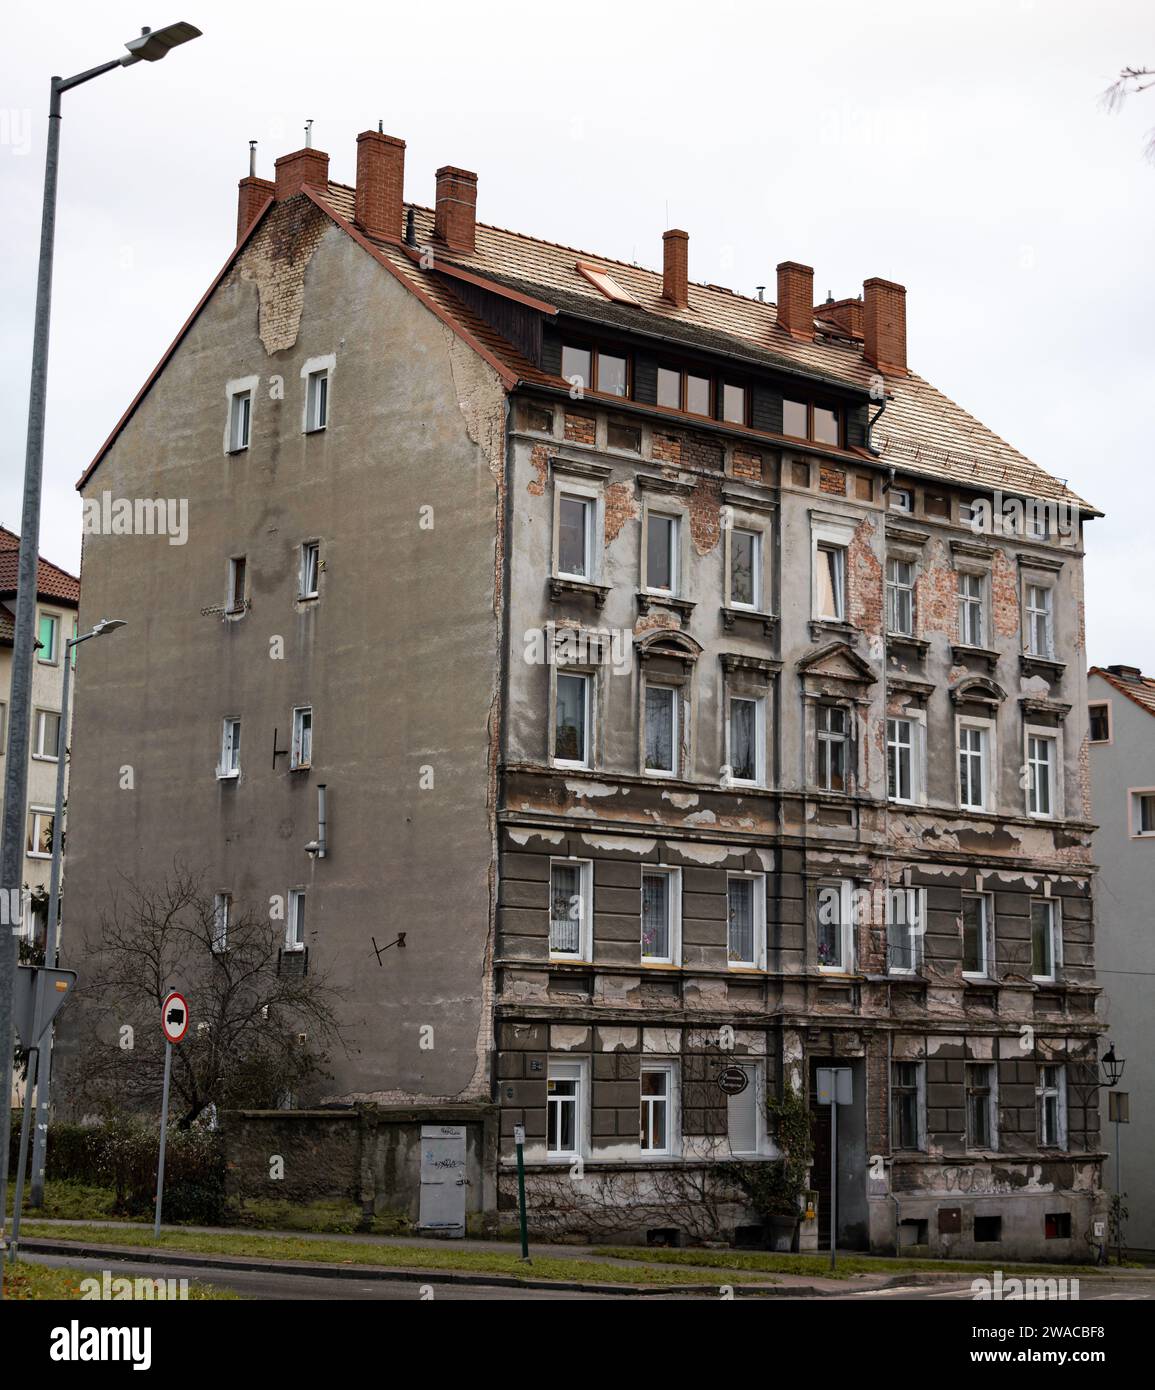 Unrenovated old building in Zgorzelec, Poland. The facade is weathered and the plaster parts are broken out. The exterior is in a bad condition. Stock Photo